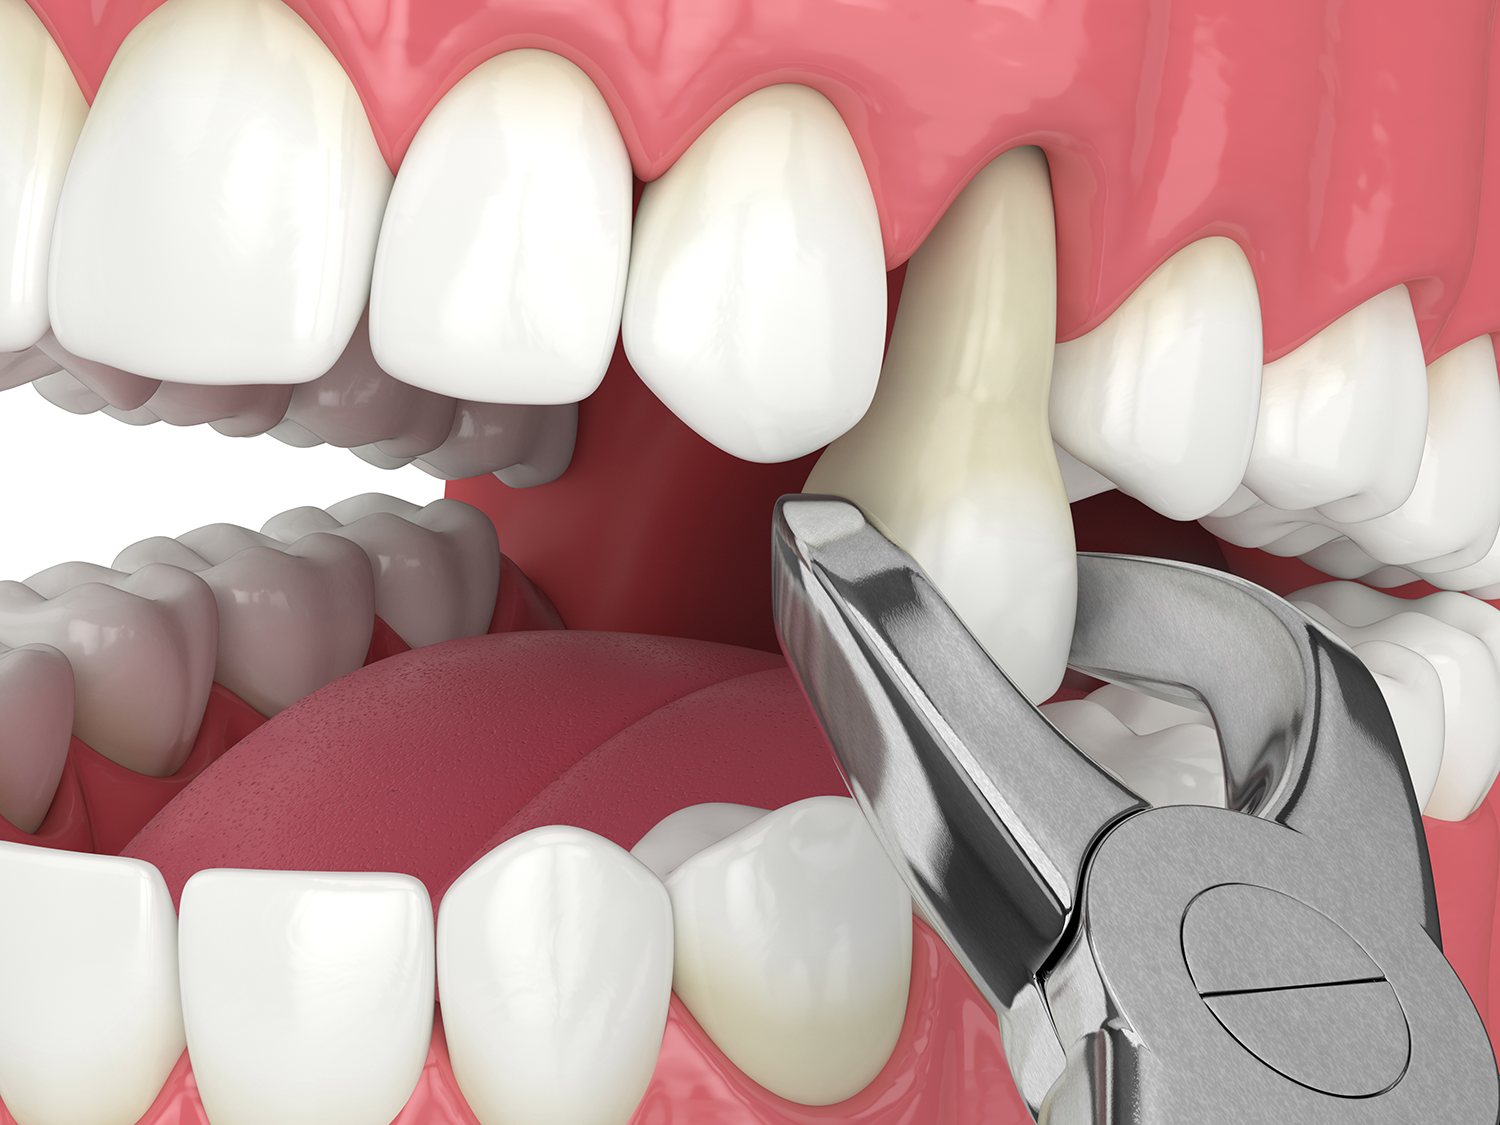 closeup model of a tooth extraction not showing any blood just a tooth barely coming out of a model mouth